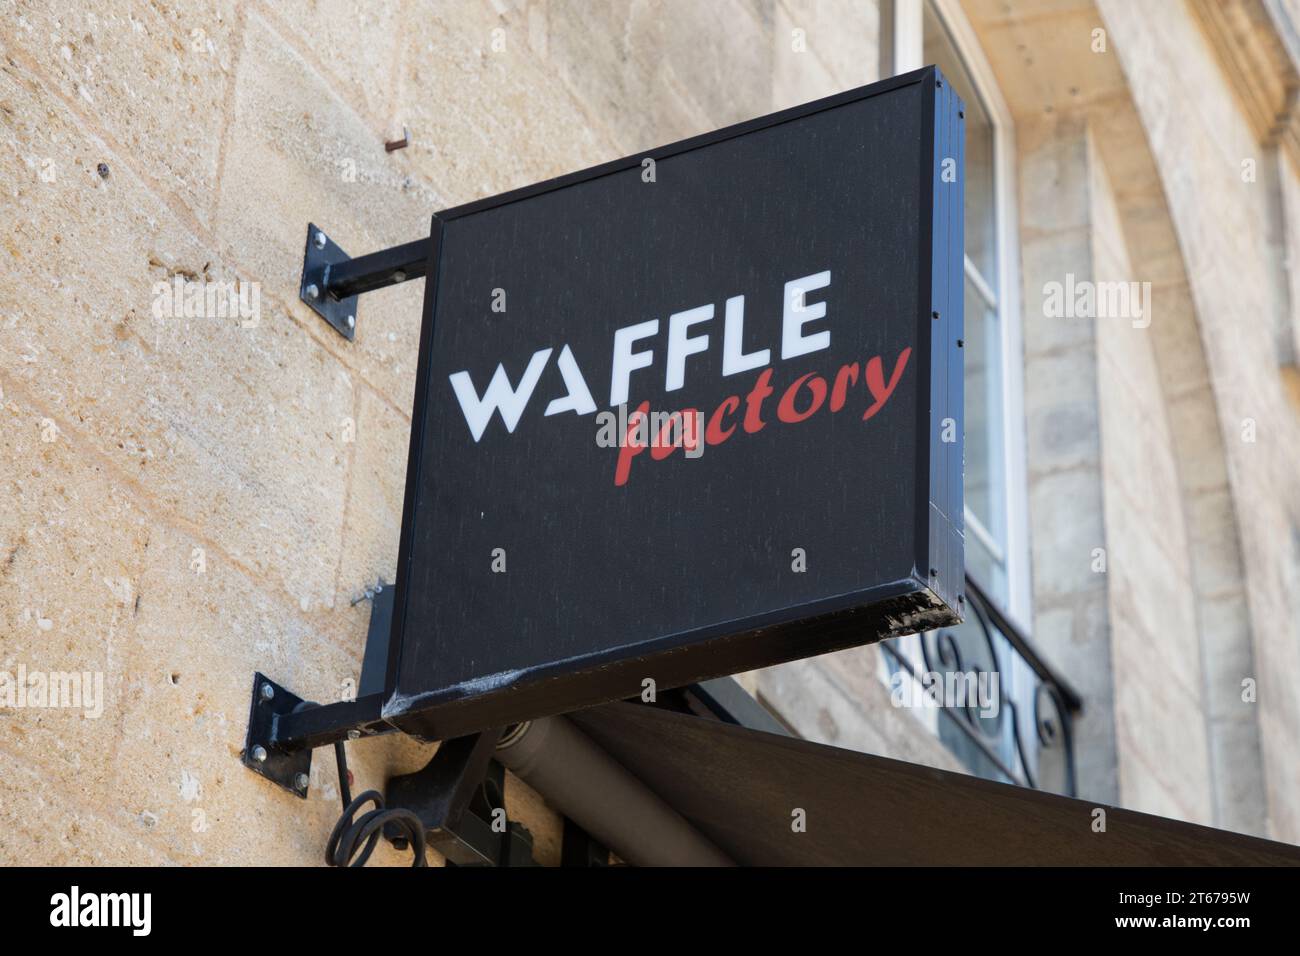 lyon , France - 11 04 2023 : Waffle factory sign logo and brand text facade front of chain fastfood wall entrance restaurant Stock Photo